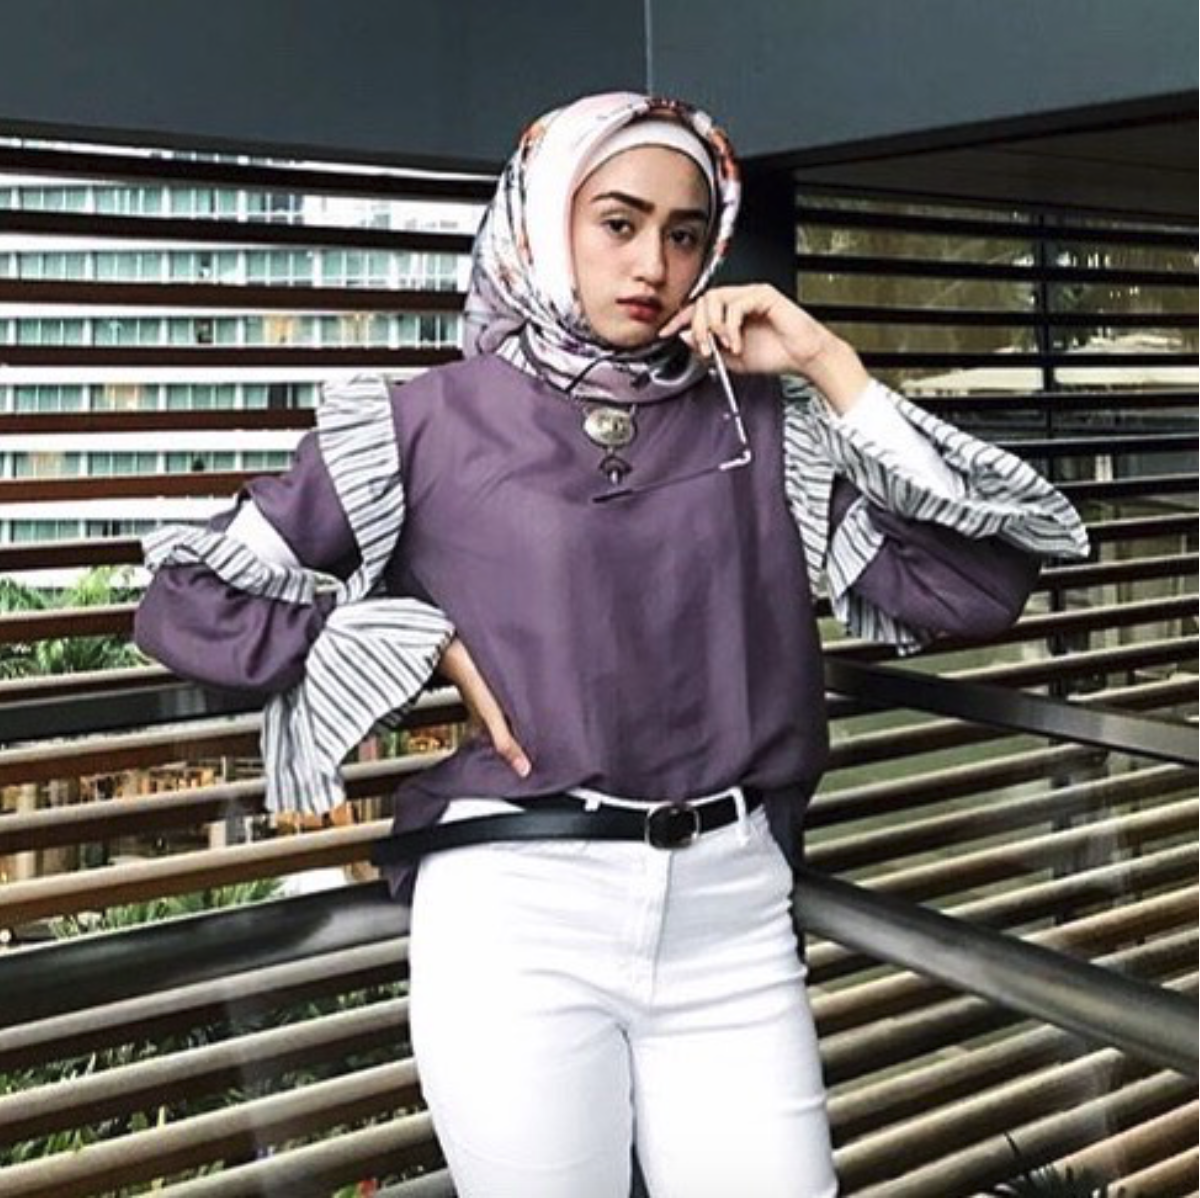 Influencer, Hnnbhell also styled in our Grape Vine Dolly Top.